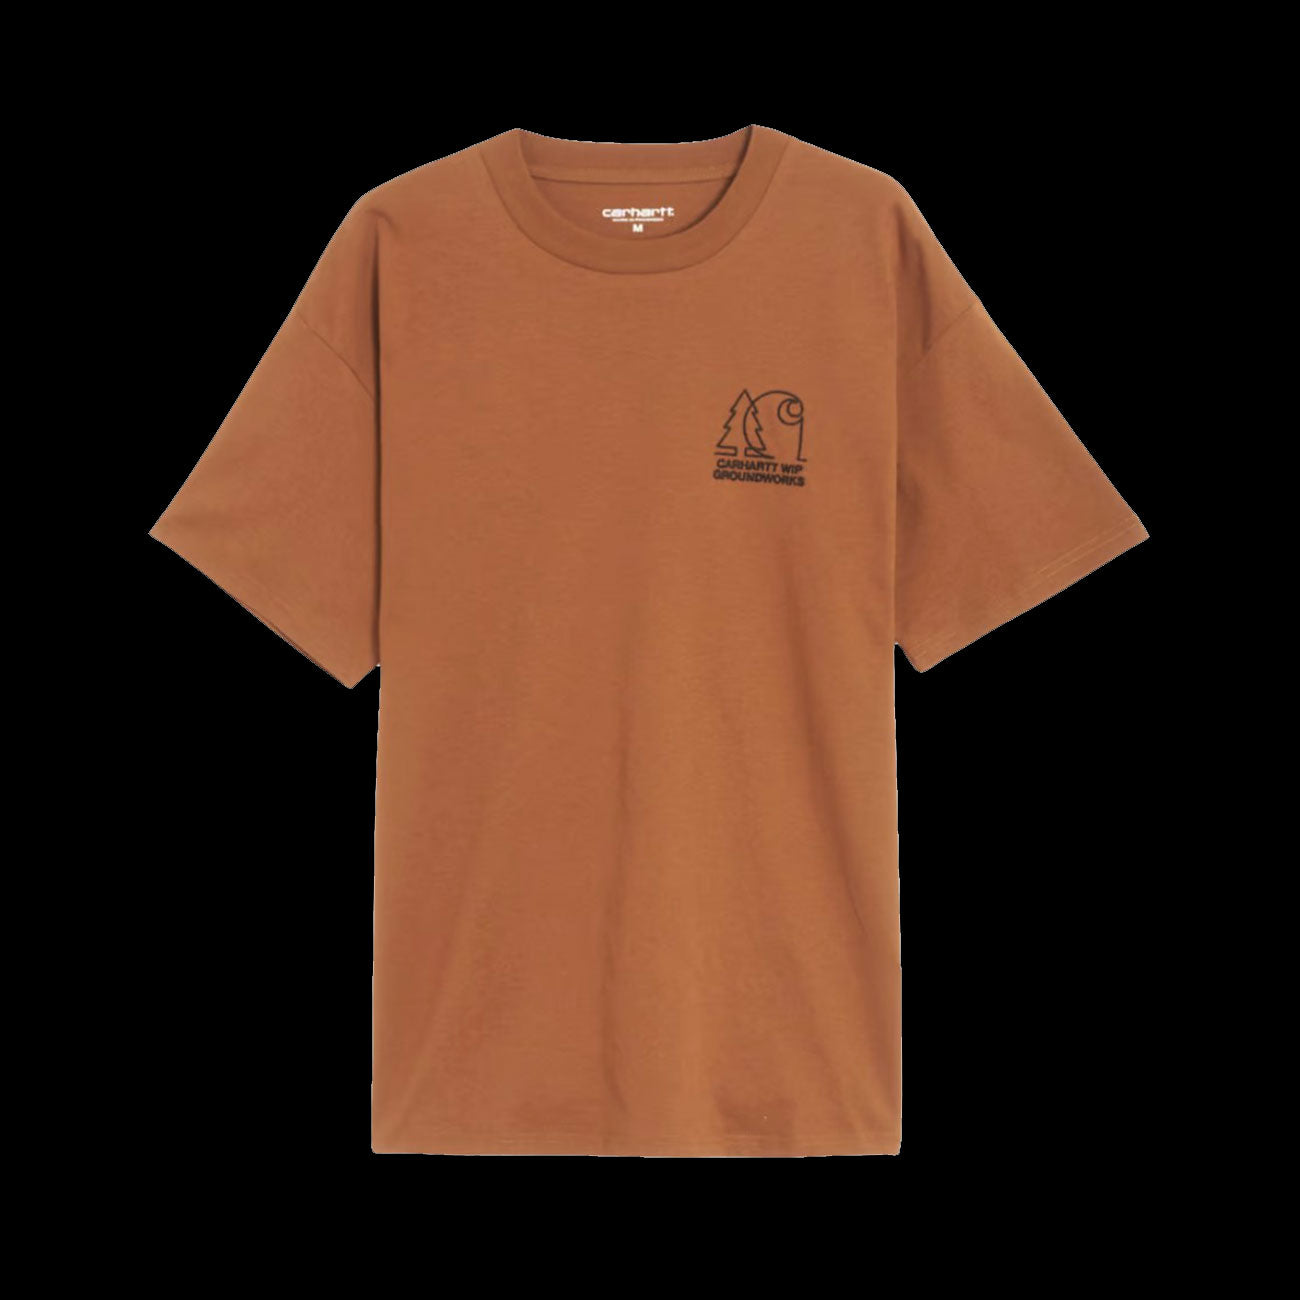 Carhartt WIP – Two 18 | T-Shirts